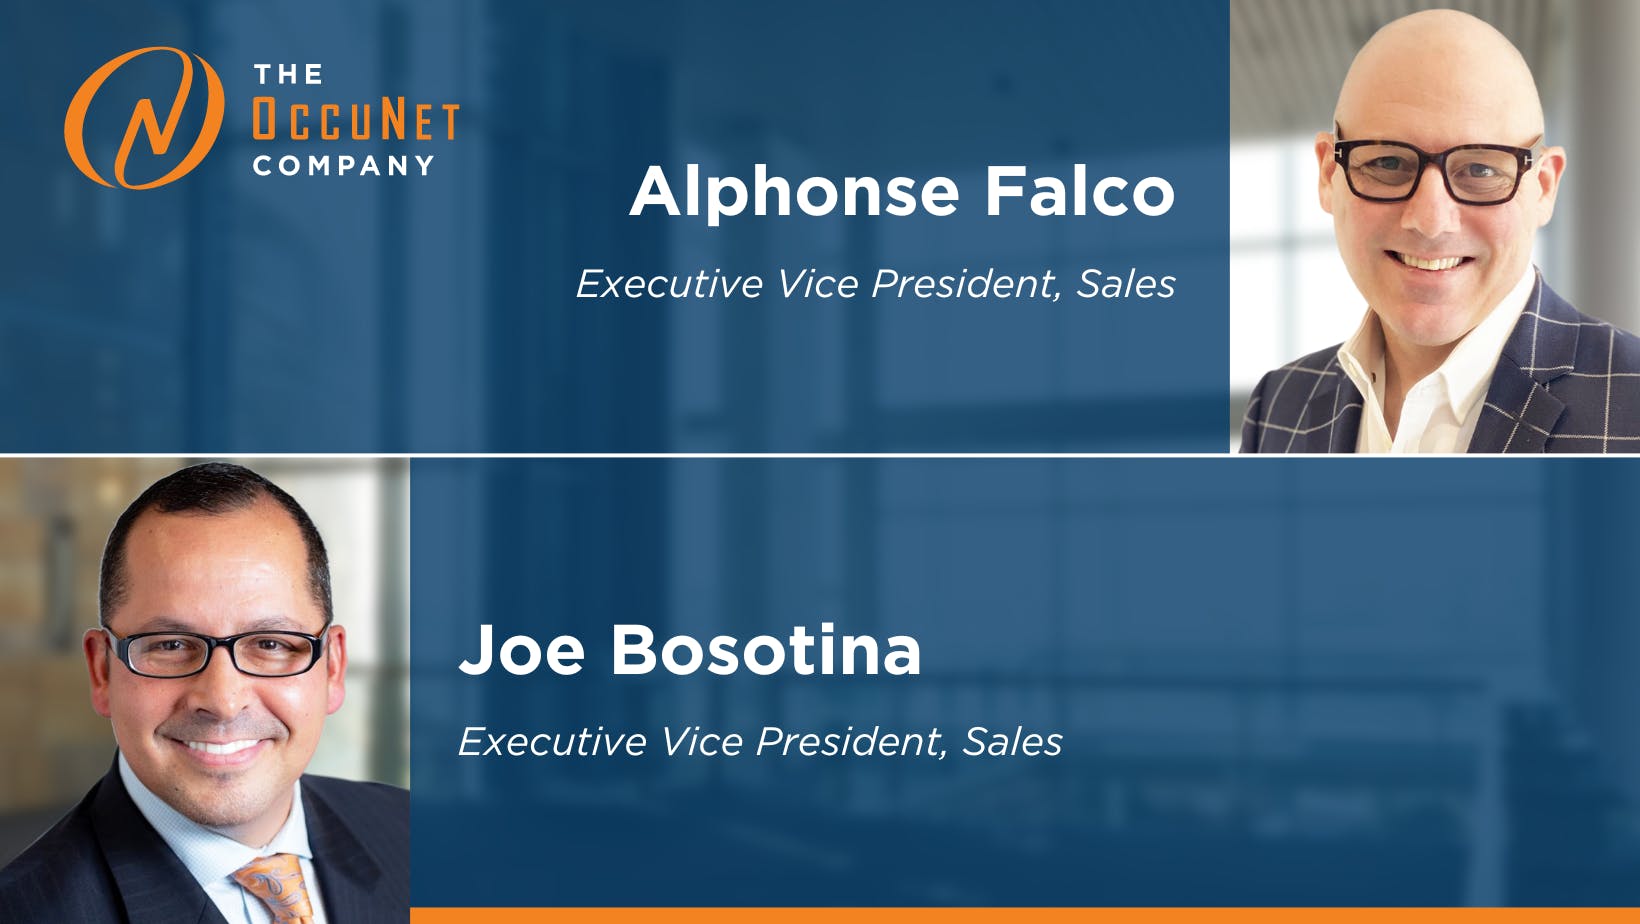 The OccuNet Company expands its presence in the Northeast by hiring experienced industry sales leaders.